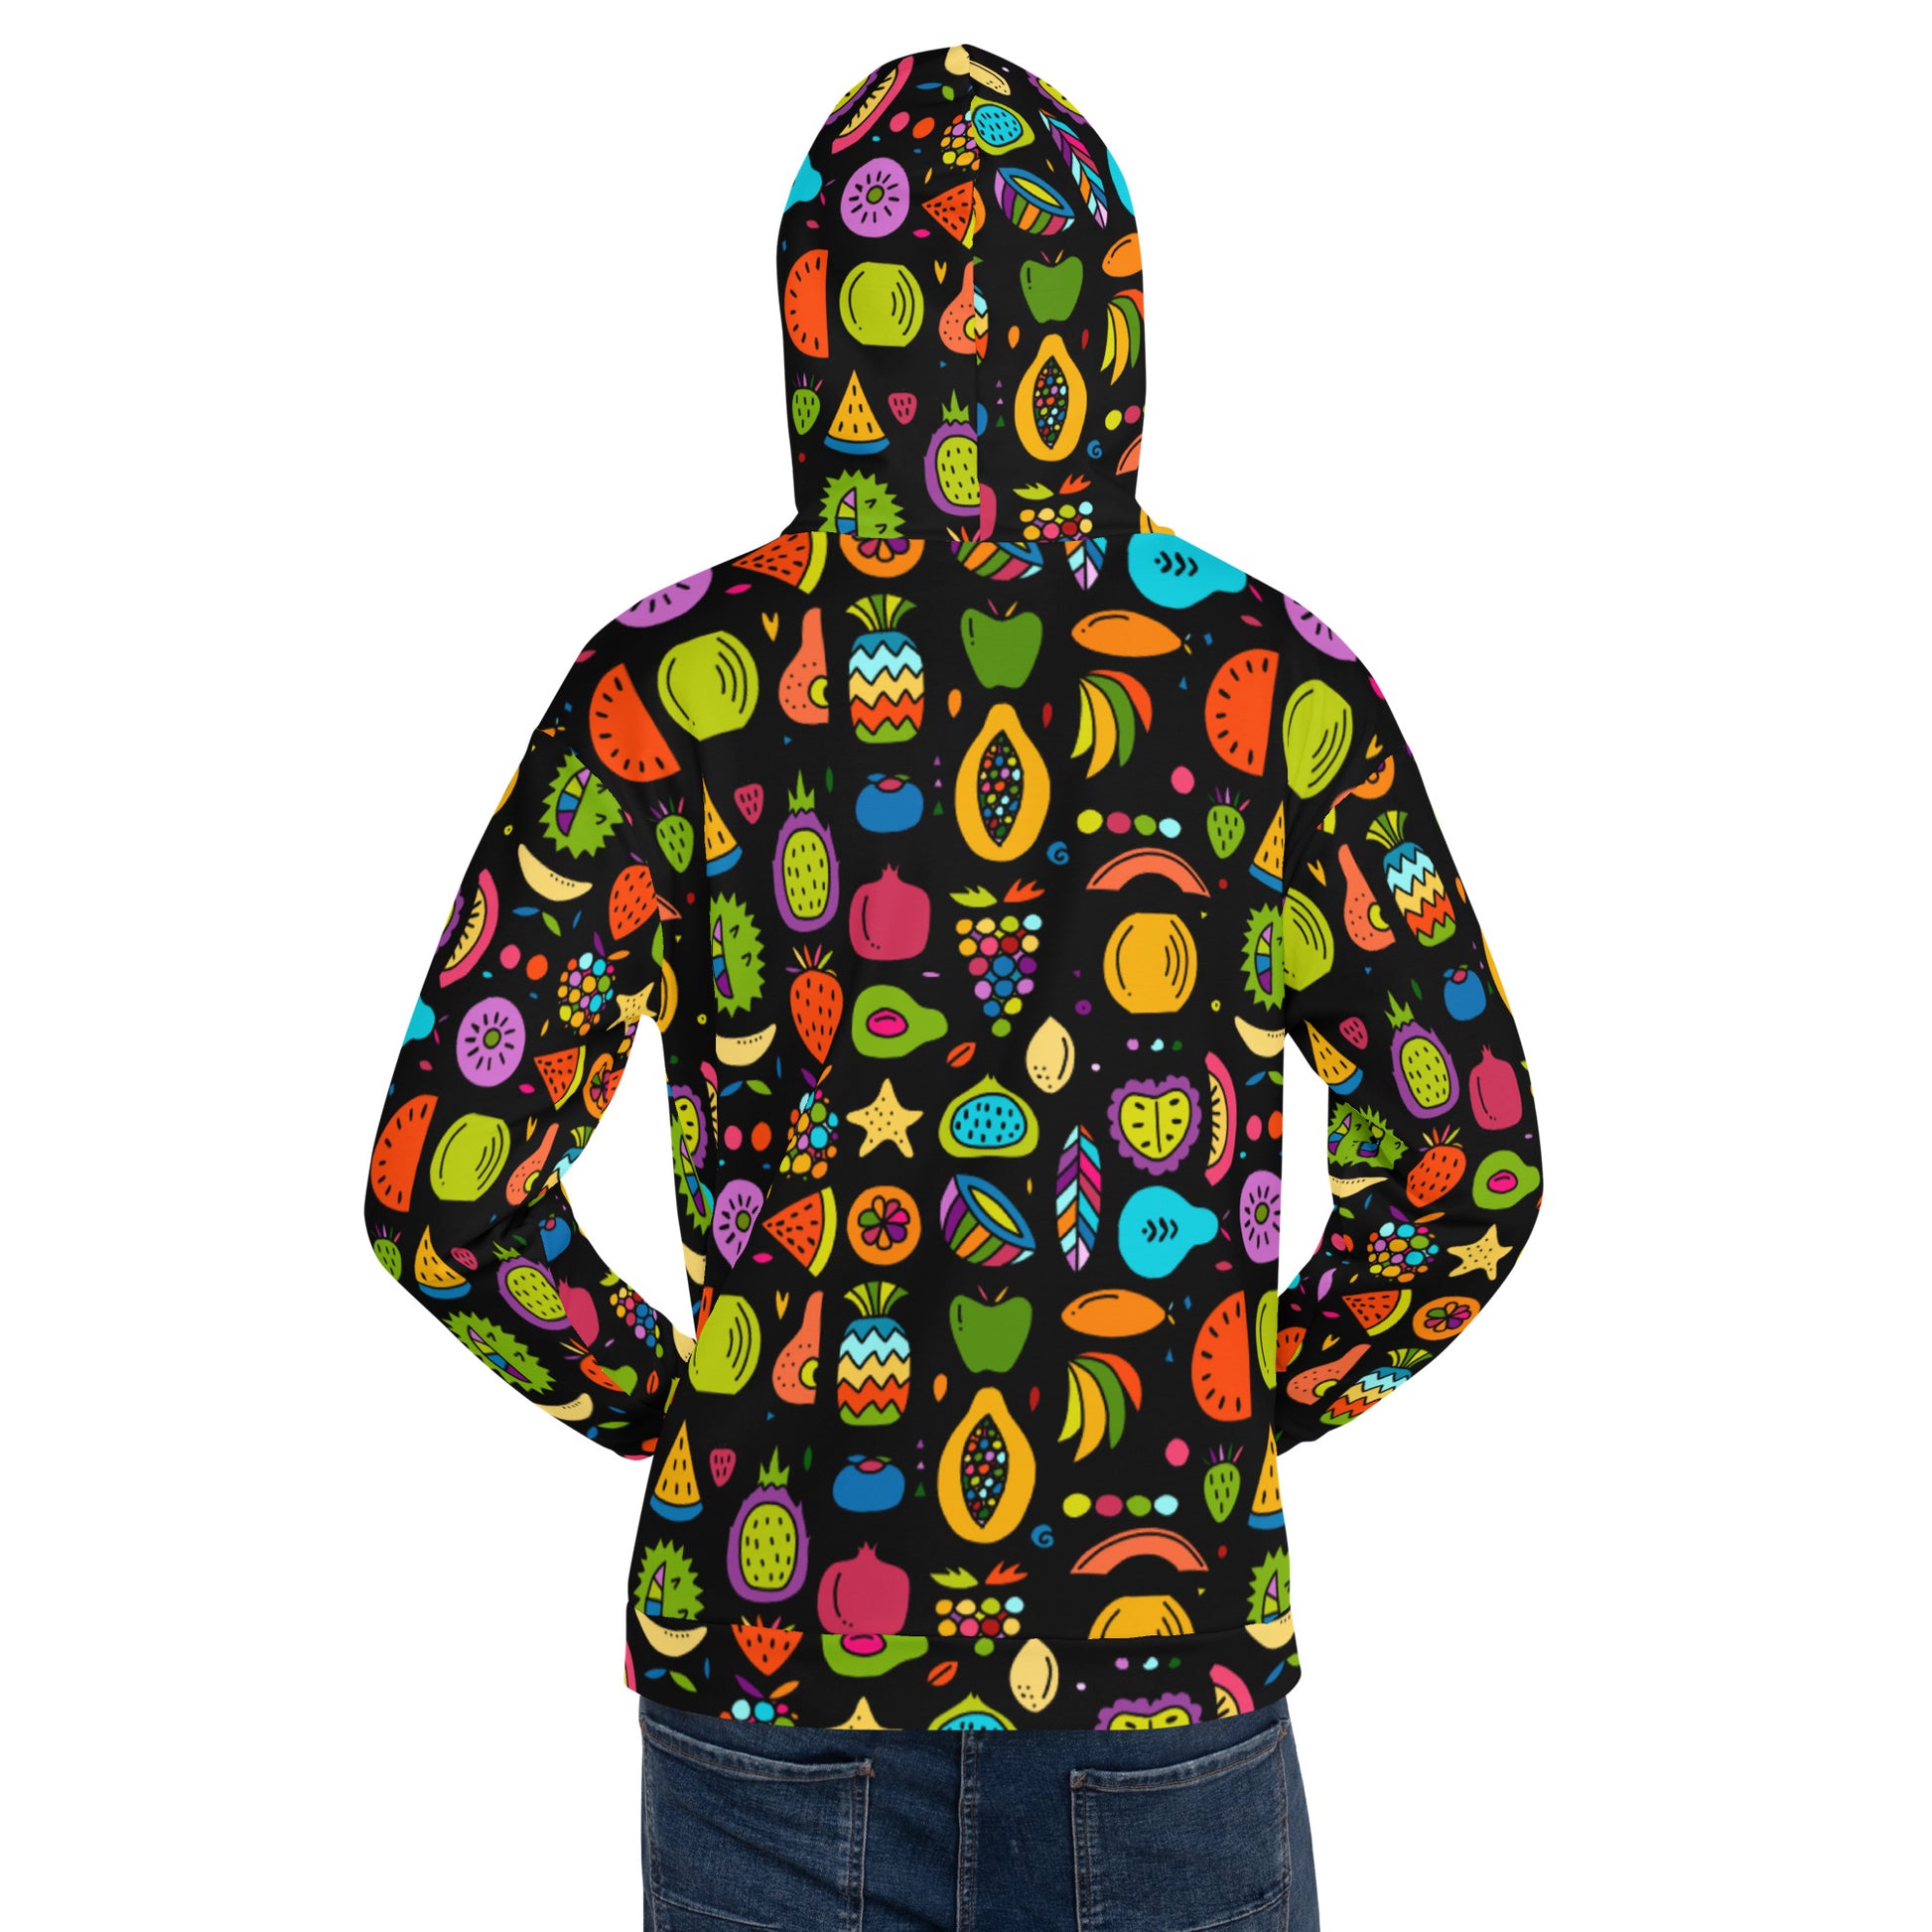 Man in Pomologist Unisex Hoodie black with colorful fruits. Back side